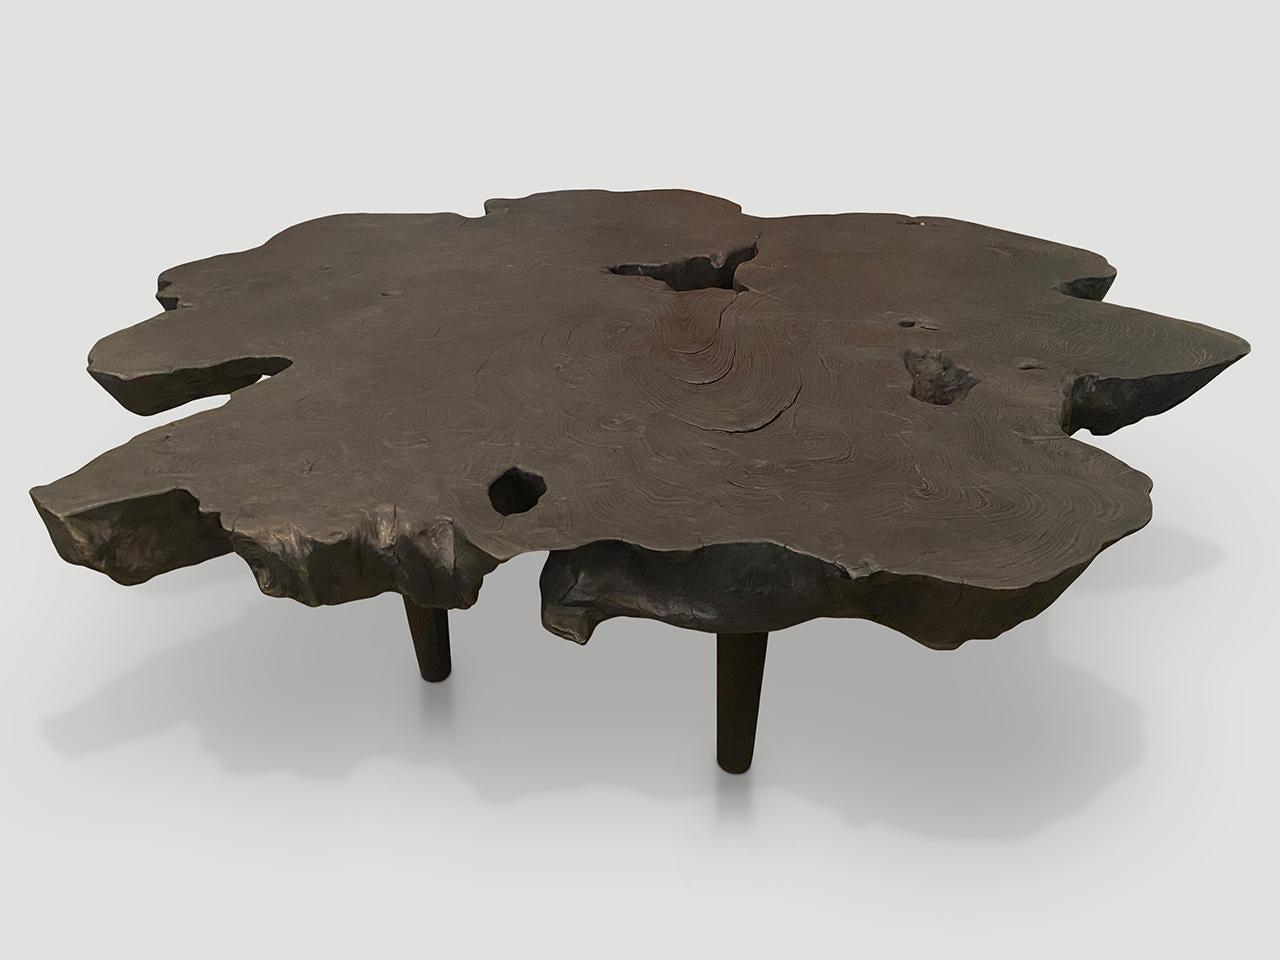 Beautiful natural shape on this three inch reclaimed teak wood coffee table. Floating on minimalist cylinder legs with a natural oil finish revealing the beautiful wood grain. Organic with a twist.

The Triple Burnt Collection represents a unique